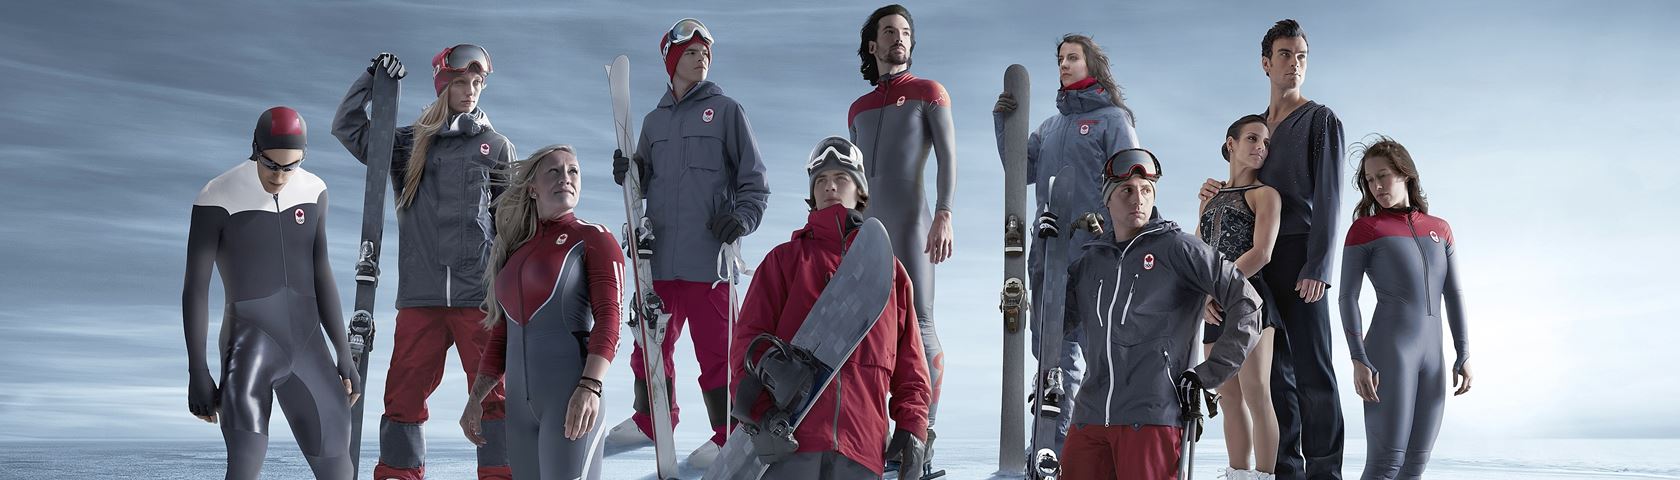 The Official Sochi 2014 Canadian Olympic Team